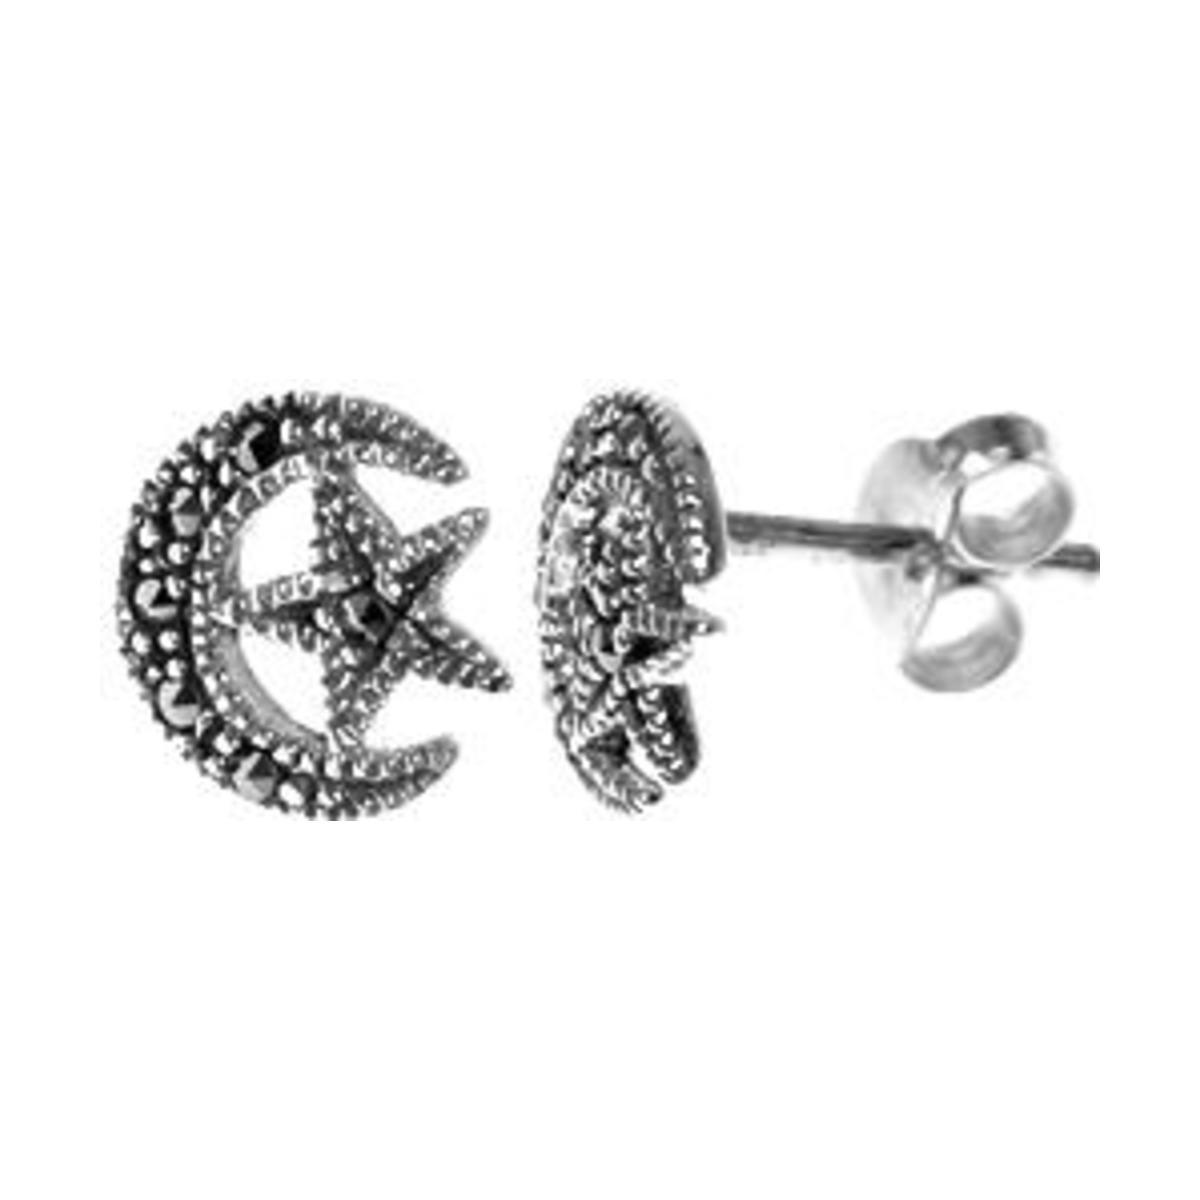 Silver & Marcasite Moon With Star Stud Earrings